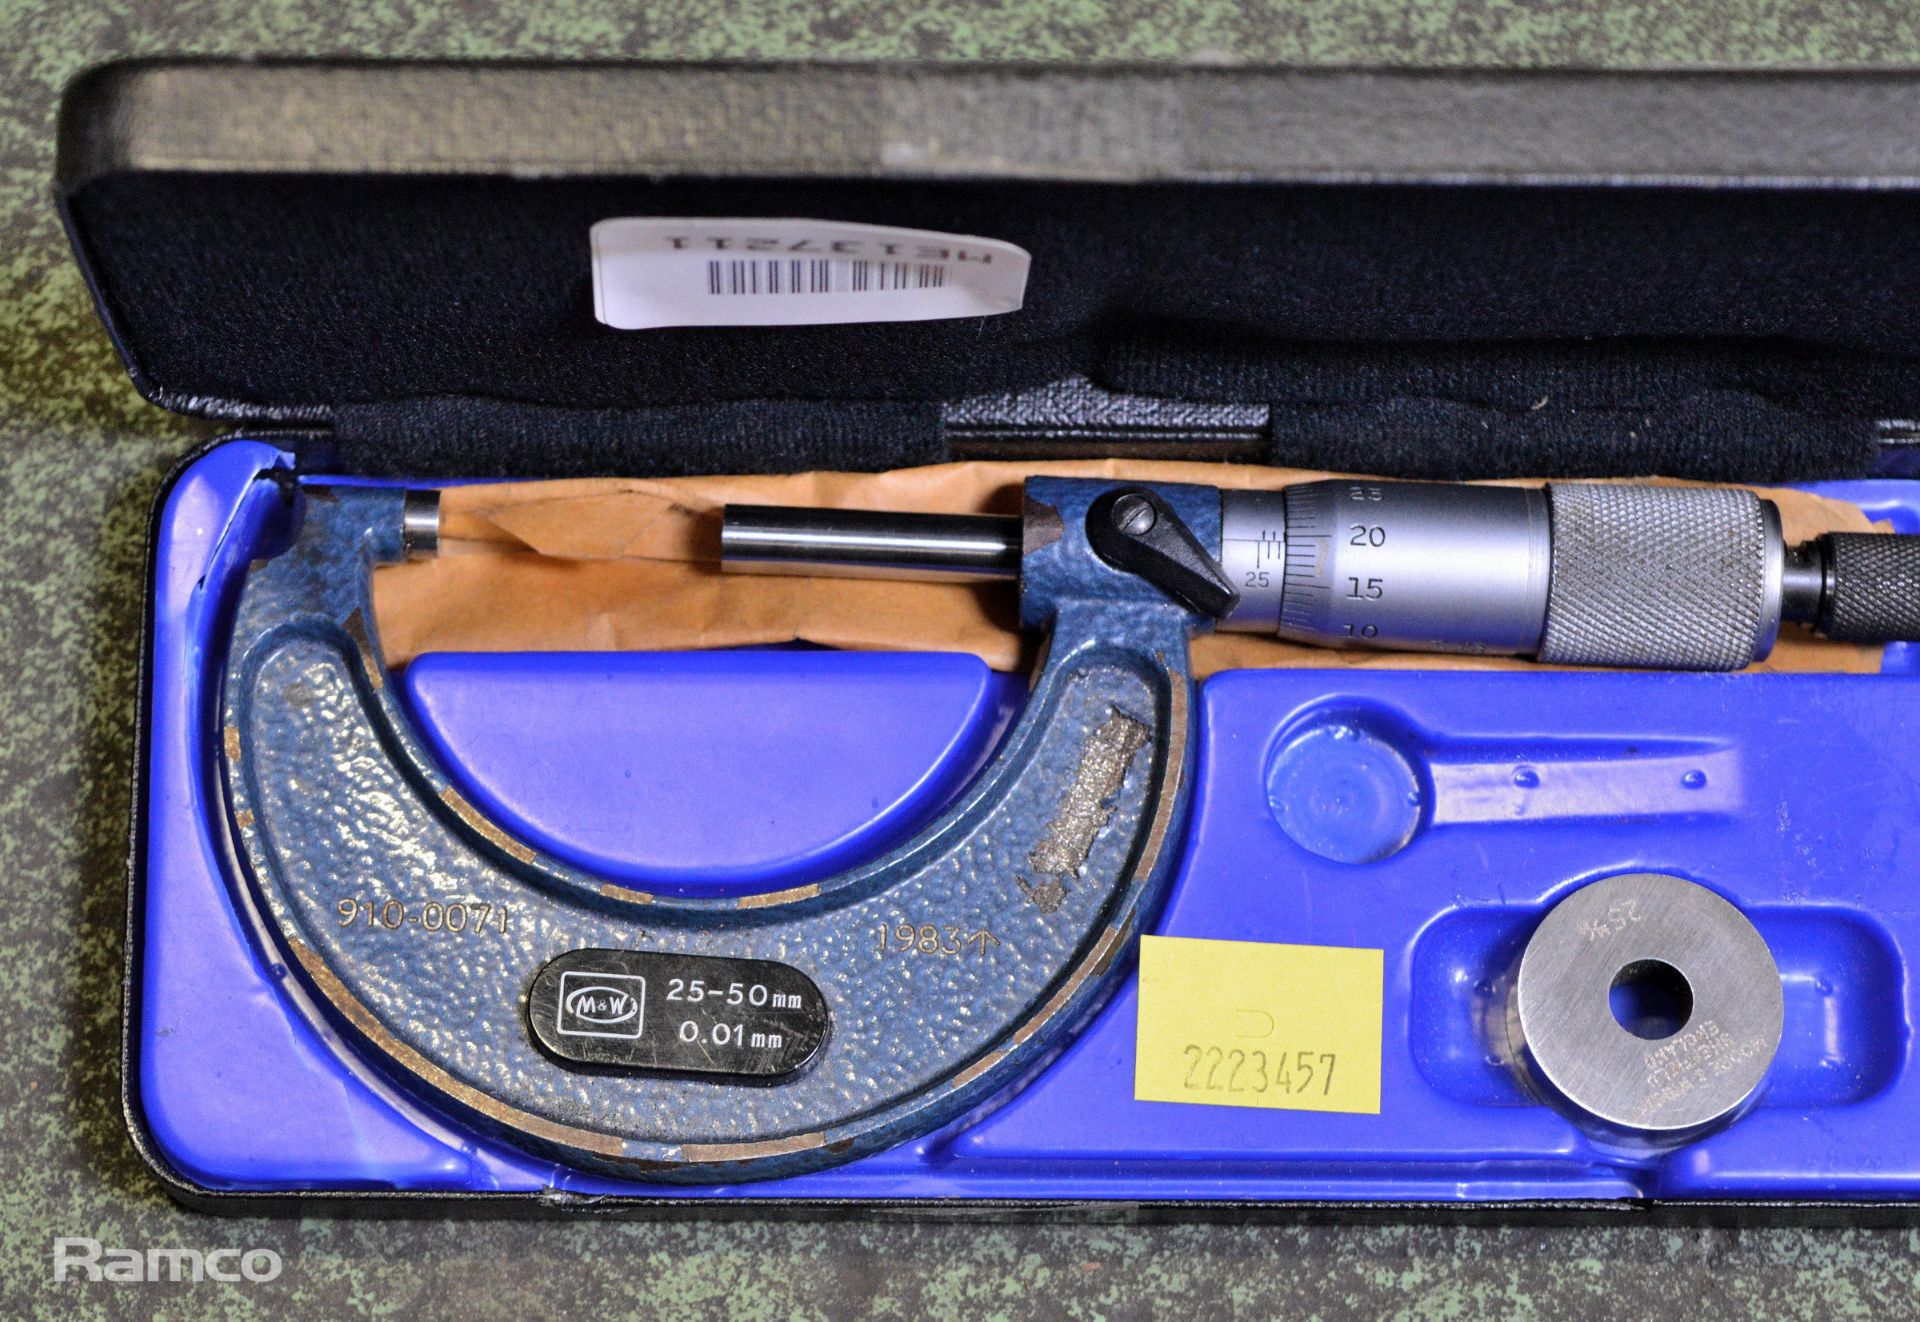 Moore & Wright Micrometer Caliper 25-50mm + Case - Image 2 of 4